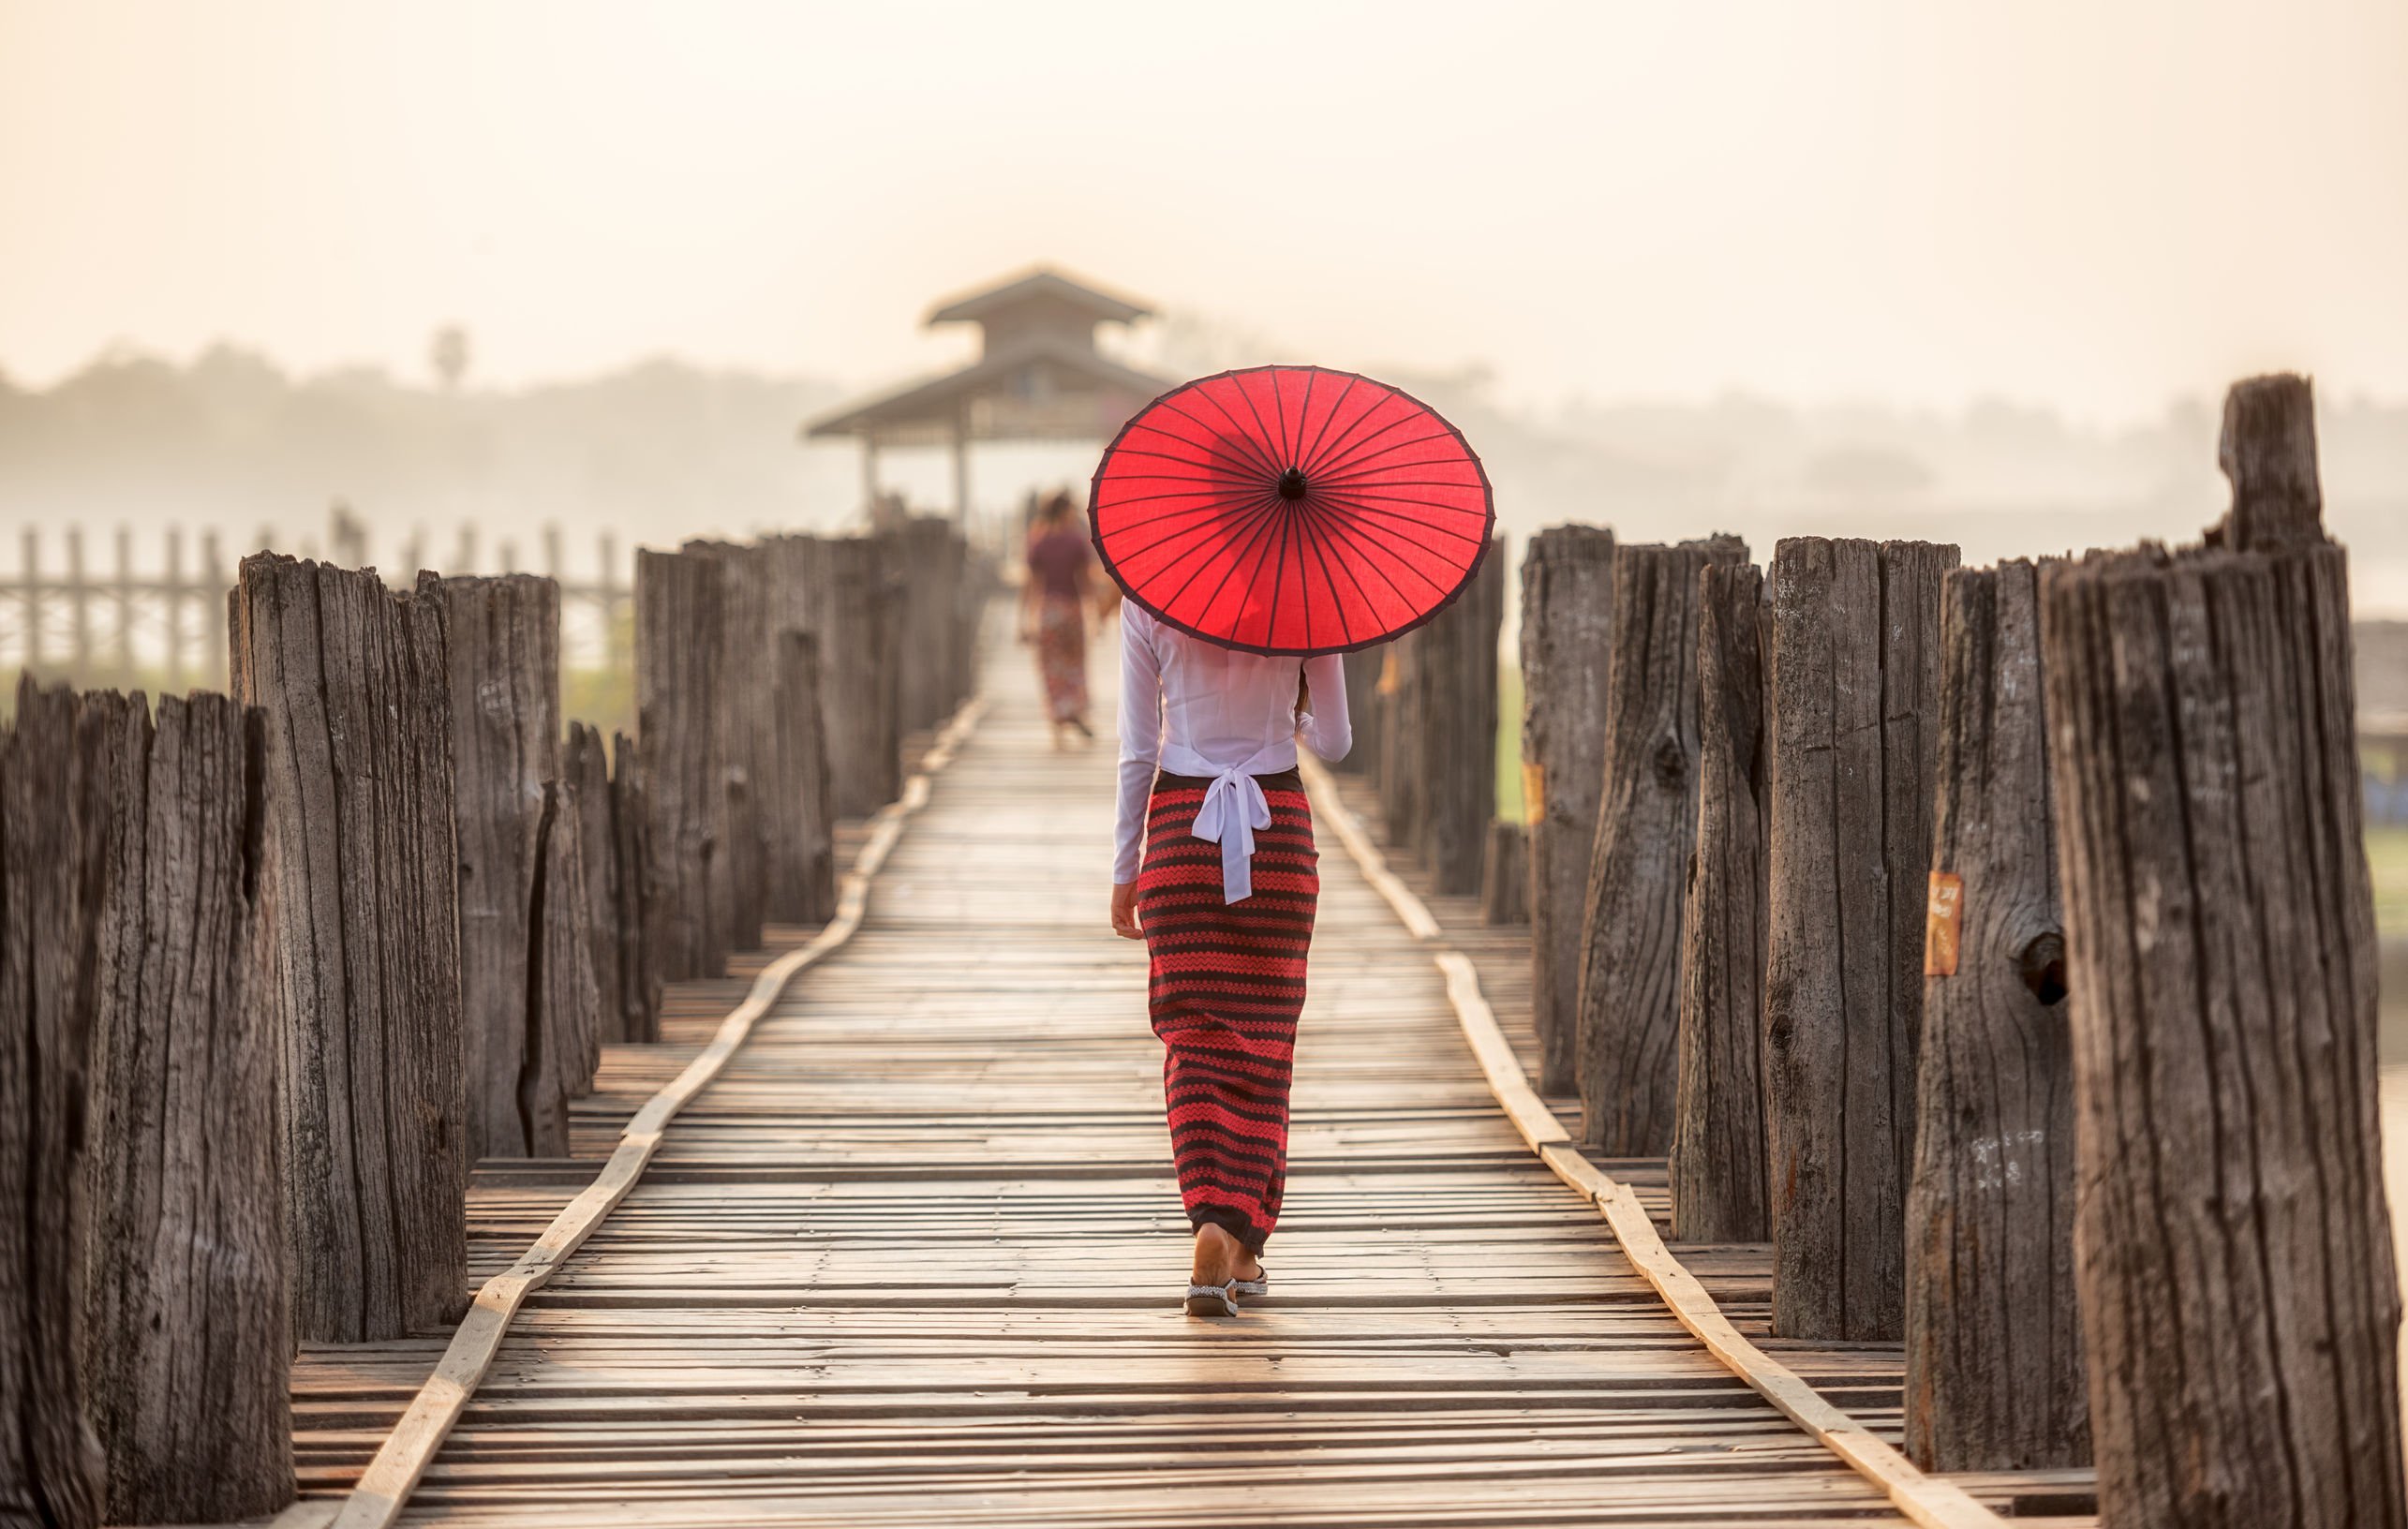 body language of an asian lady holding a red umbrella while crossing a wooden bridge shows confidence